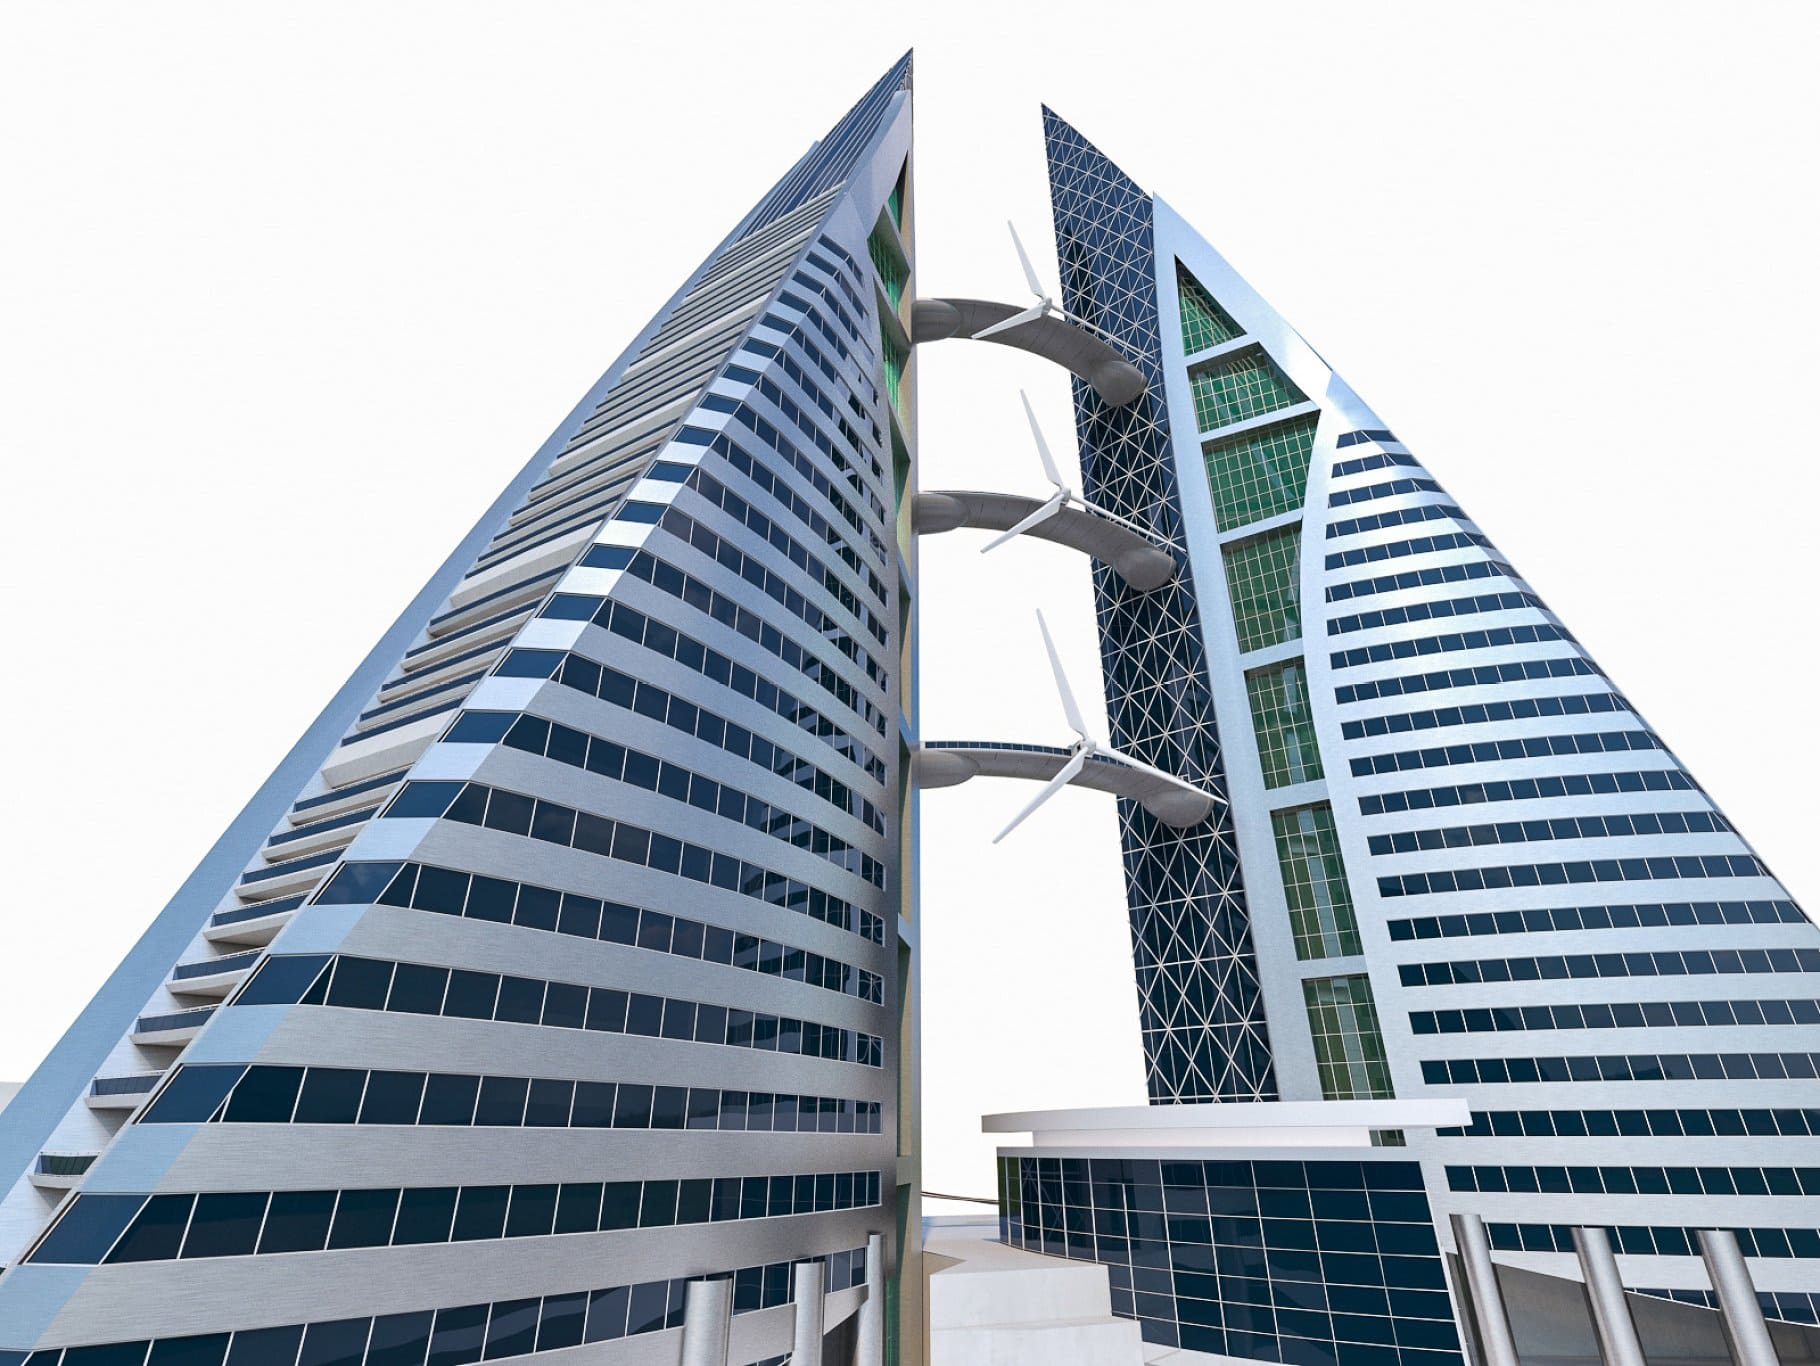 An image of the Bahrain World Trade Center is shown from the side.